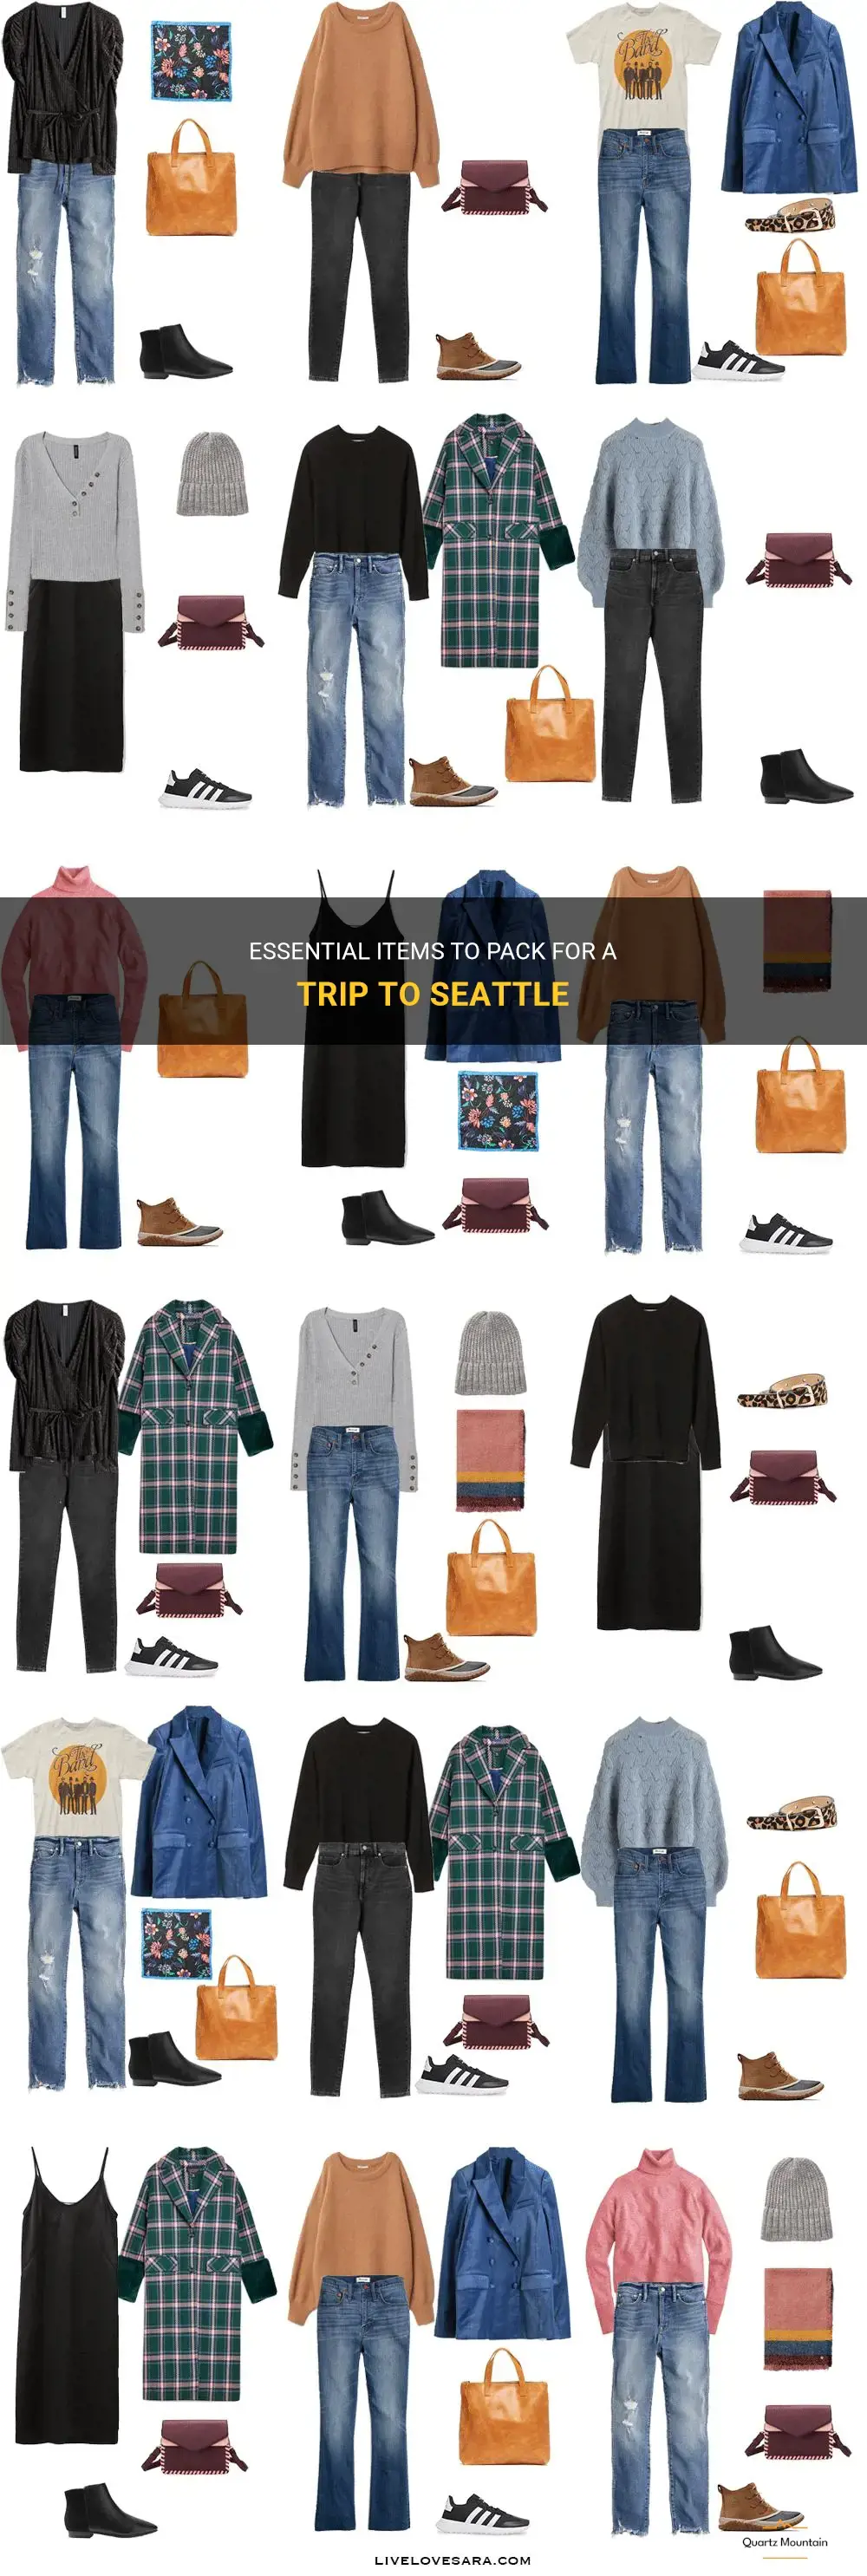 what should I pack for a trip to seattle